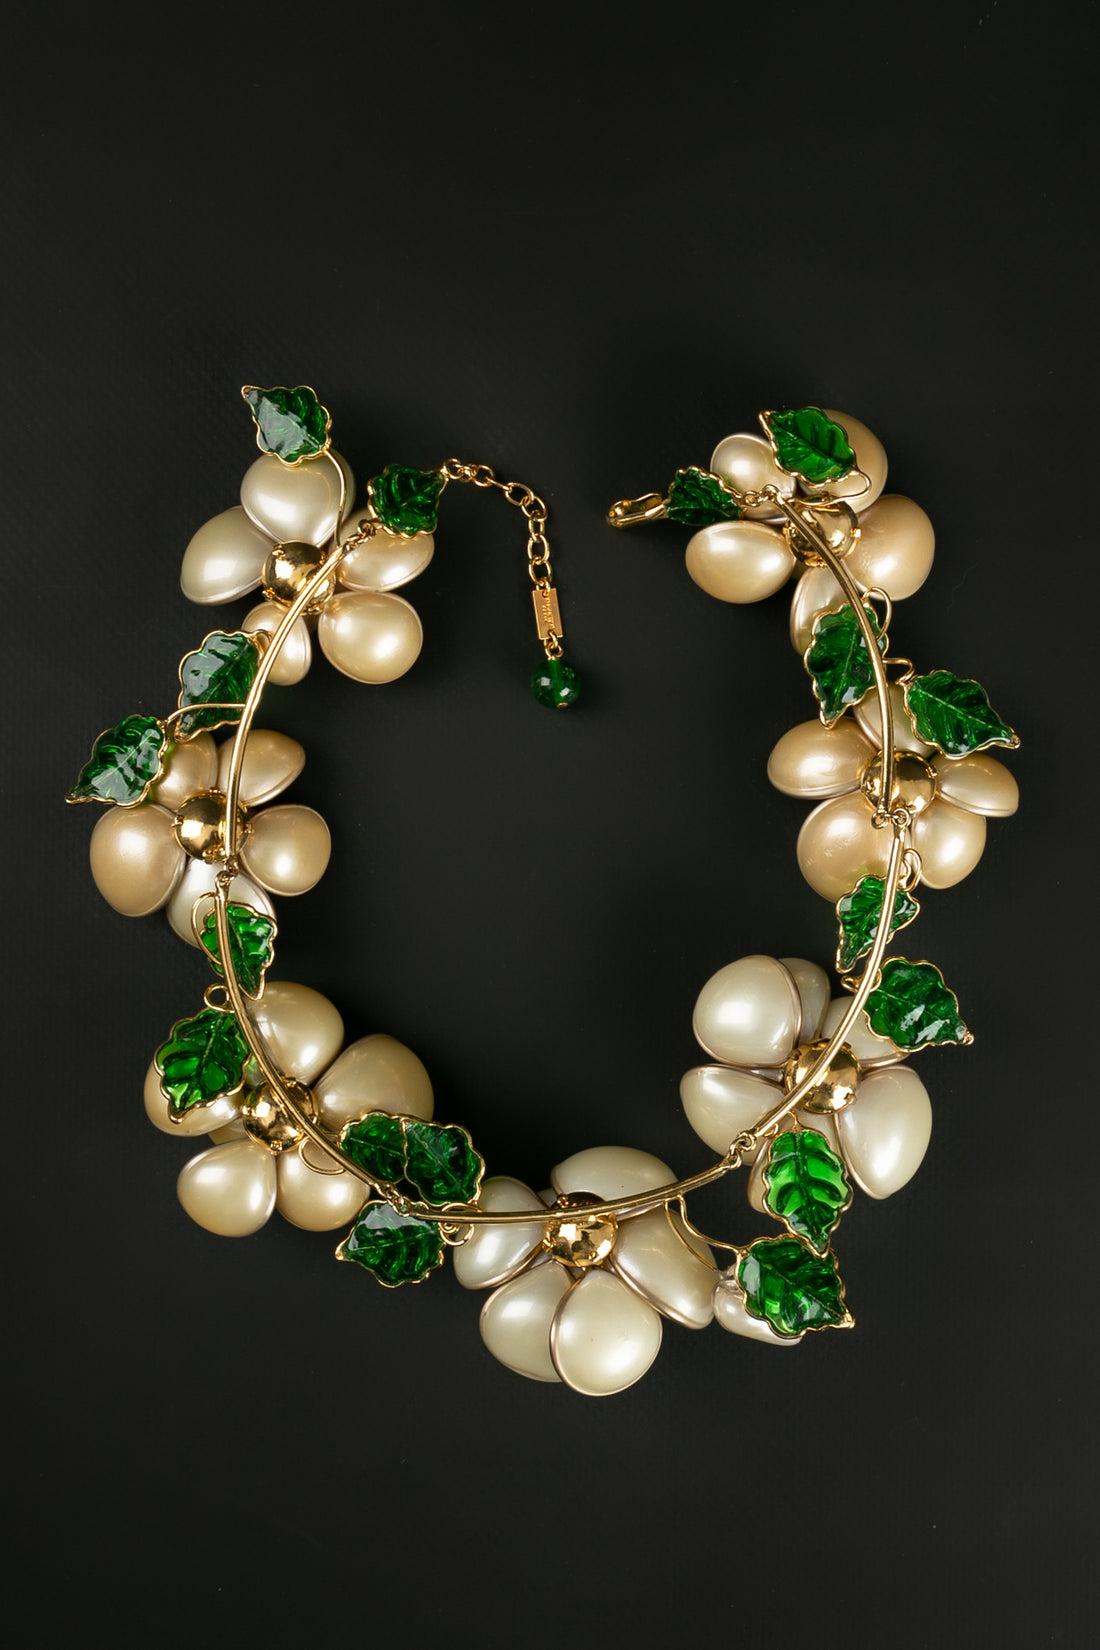 Augustine : Short articulated gilded metal necklace with pearly glass paste flowers.

Additional information: 
Dimensions: Length: 41.5 cm to 45 cm (16.33